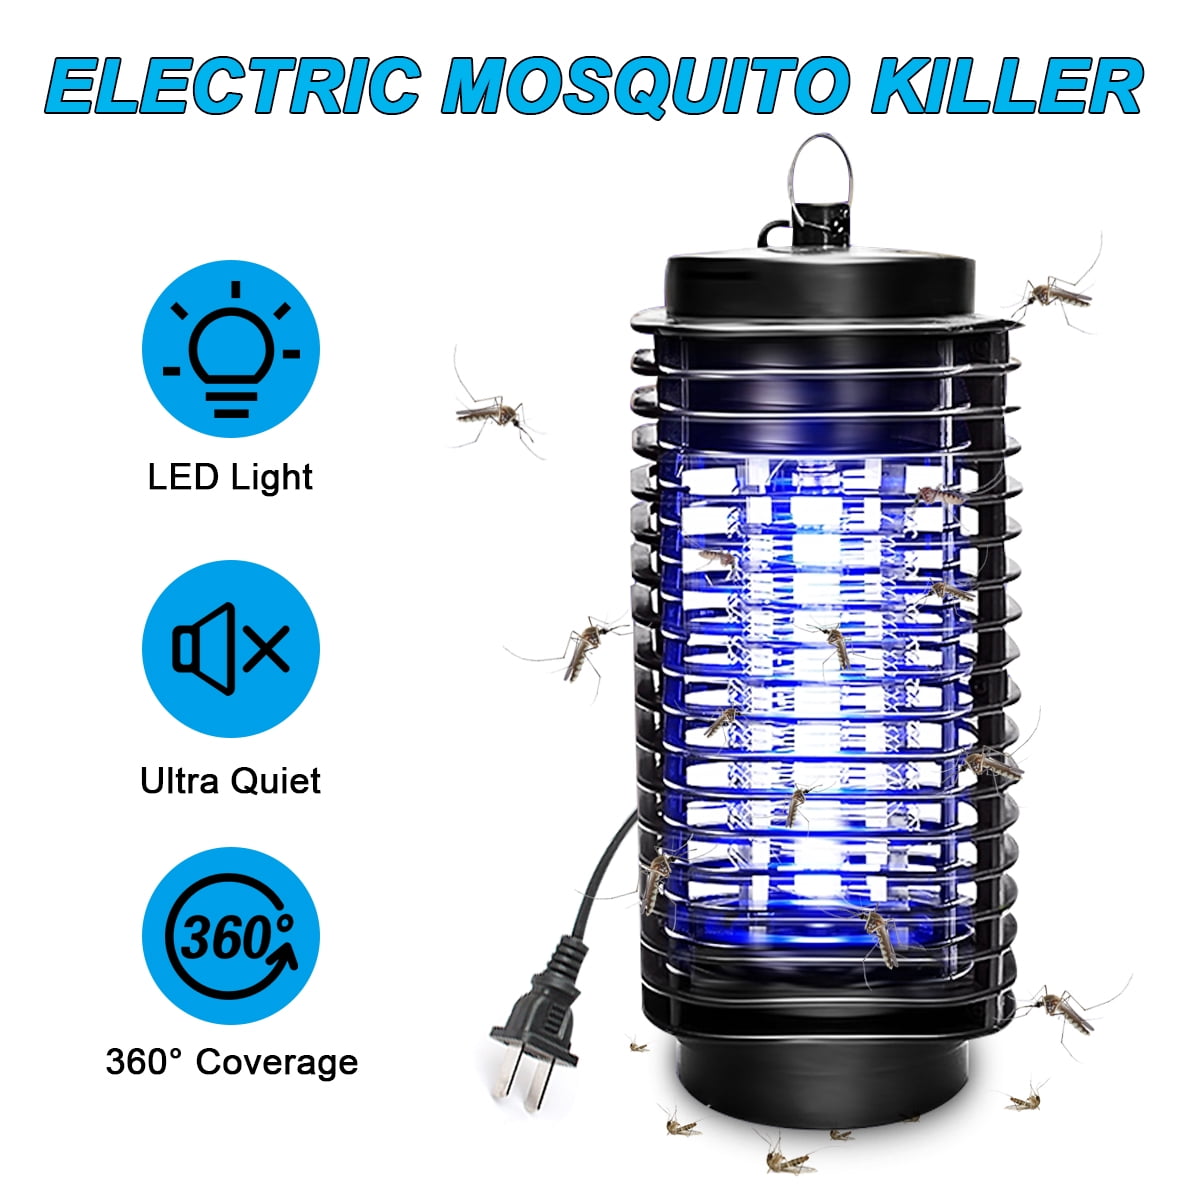 LED Electric Mosquito Killer Fly Insect Bug Zapper Catcher Trap Lamp Lights Home 